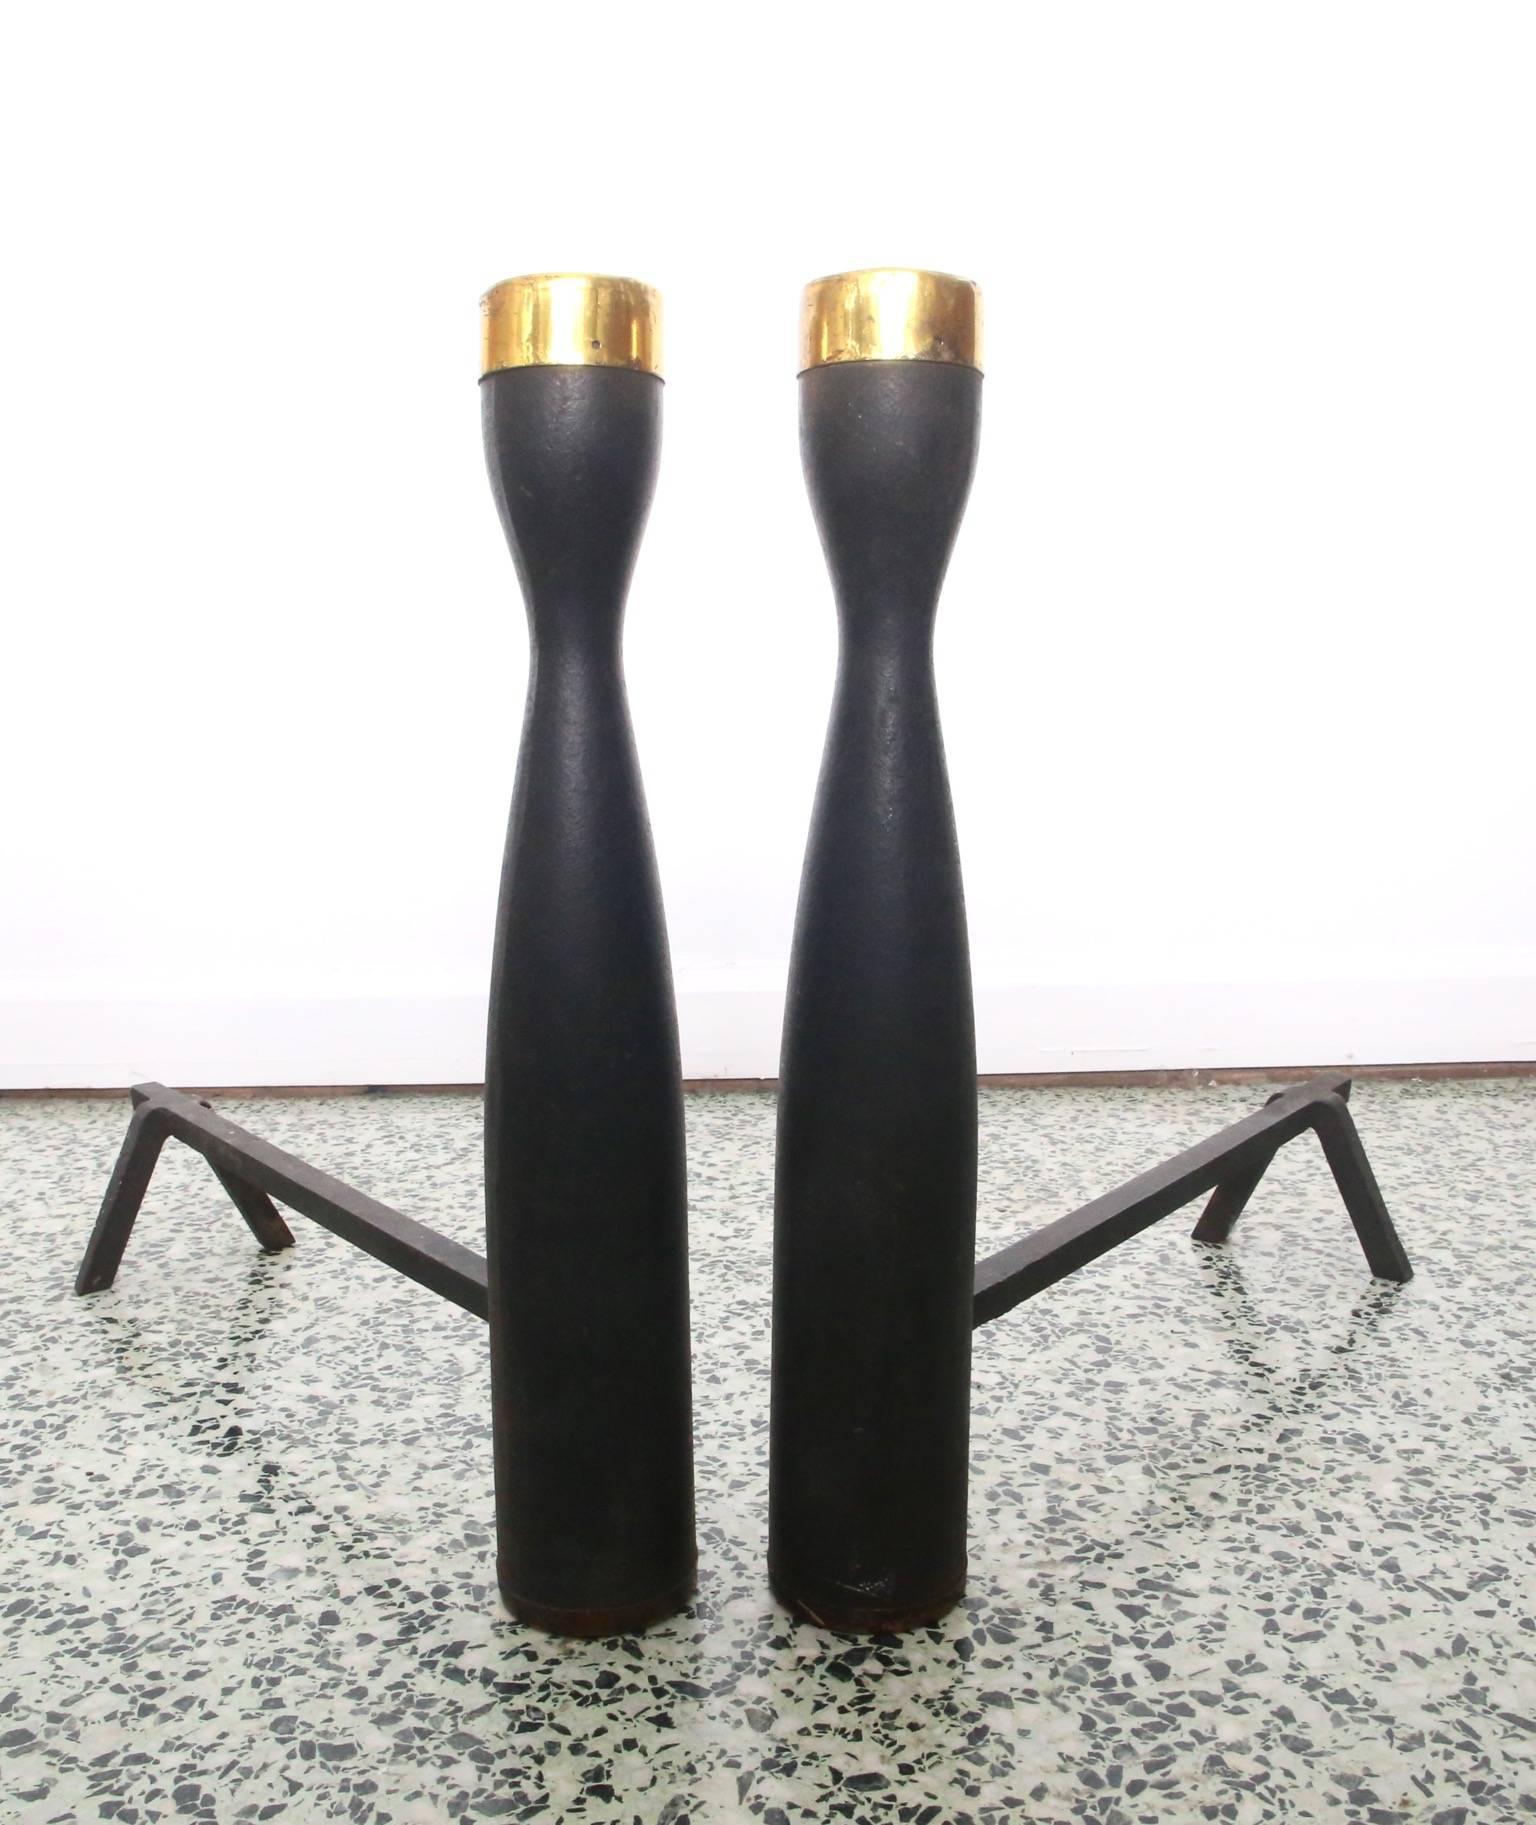 Very nice pair of modernist andirons with brass cap tops. Heavy black metal base.